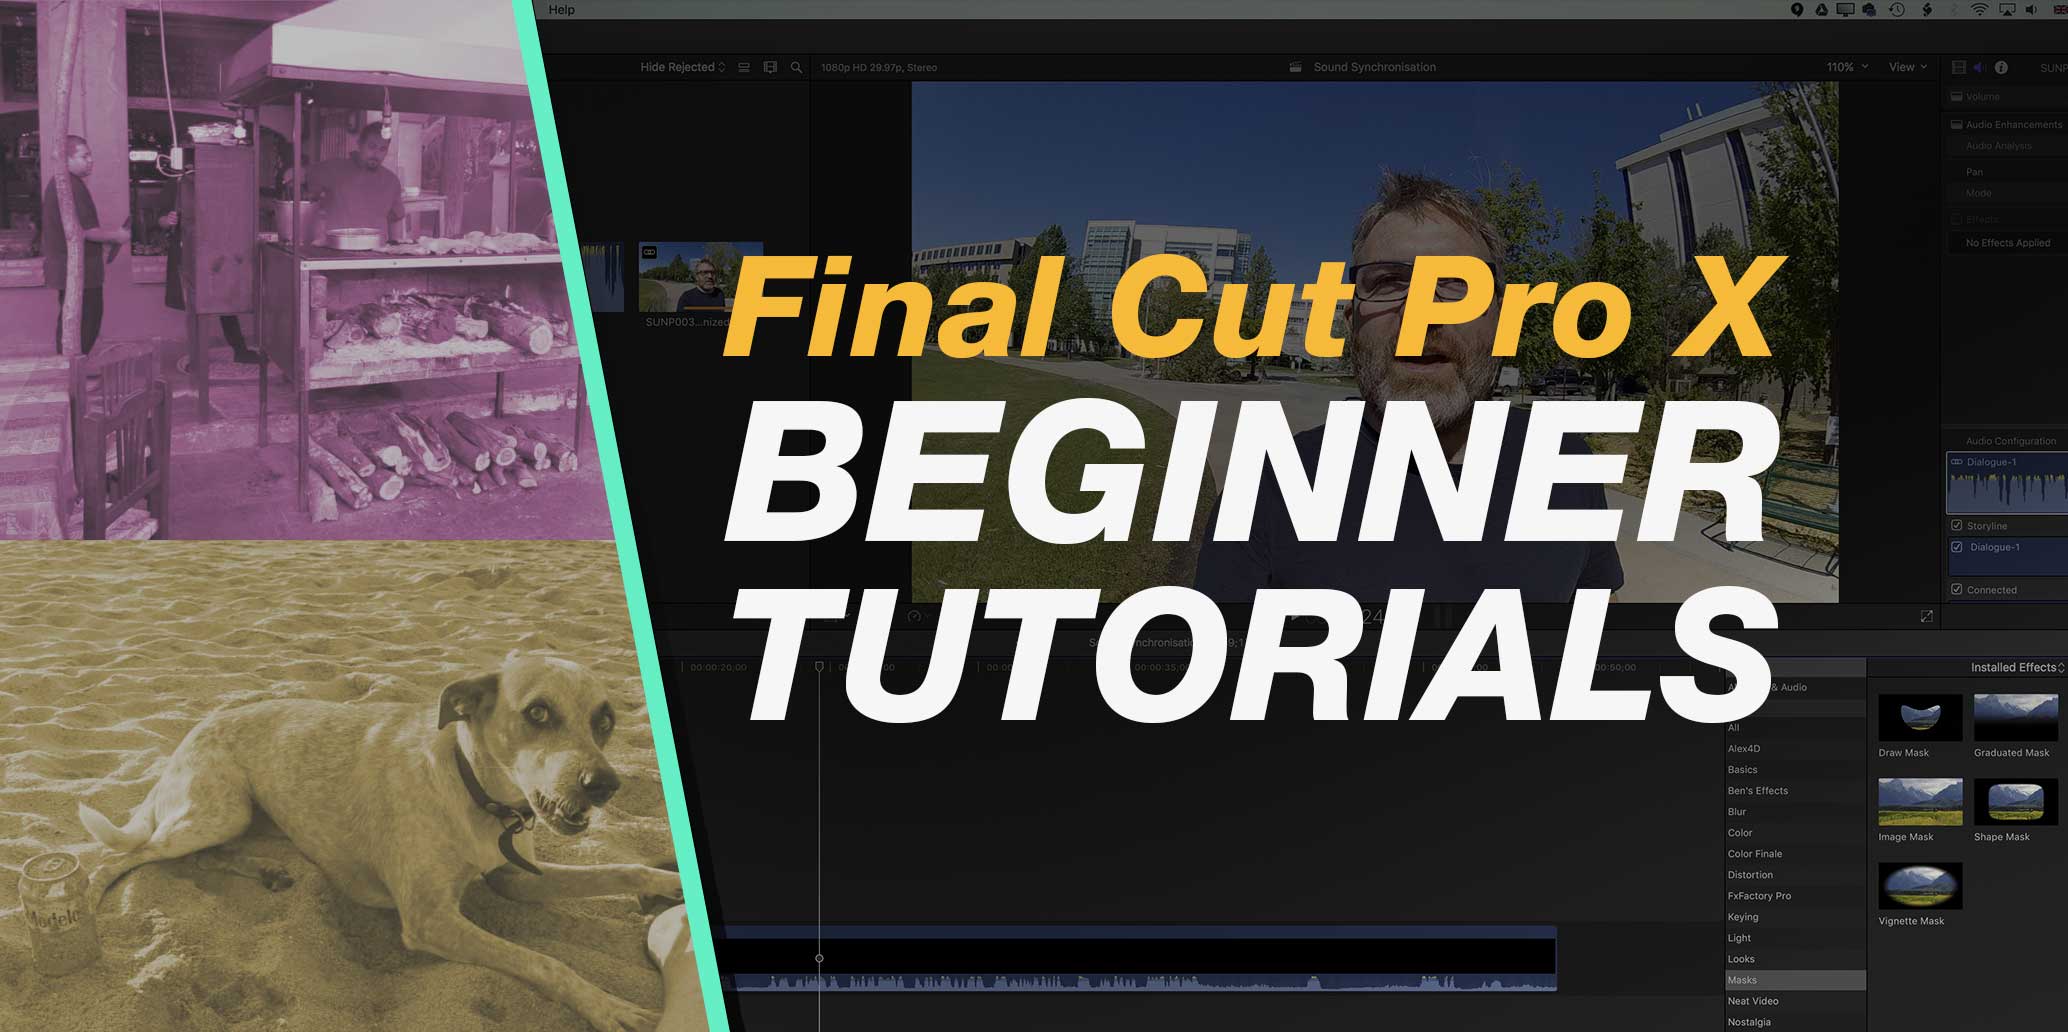 20 of the Best Final Cut Pro X Beginner Tutorials for Summer 2018 – A Complete List to Get You Started #fcpx